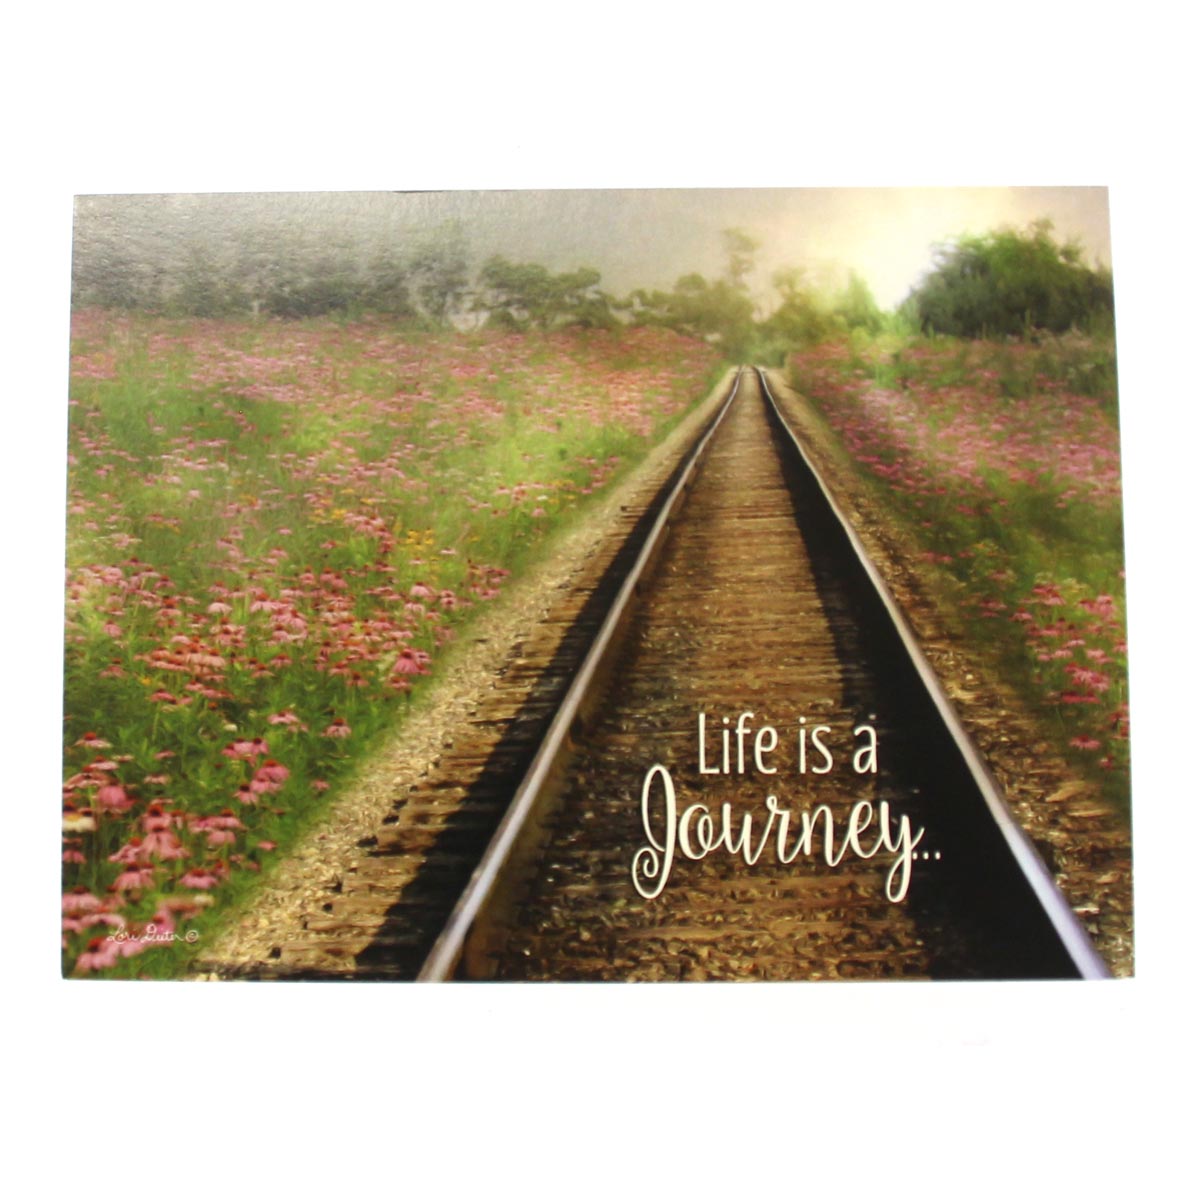 Praying for you - Life is a Journey (with Scripture)